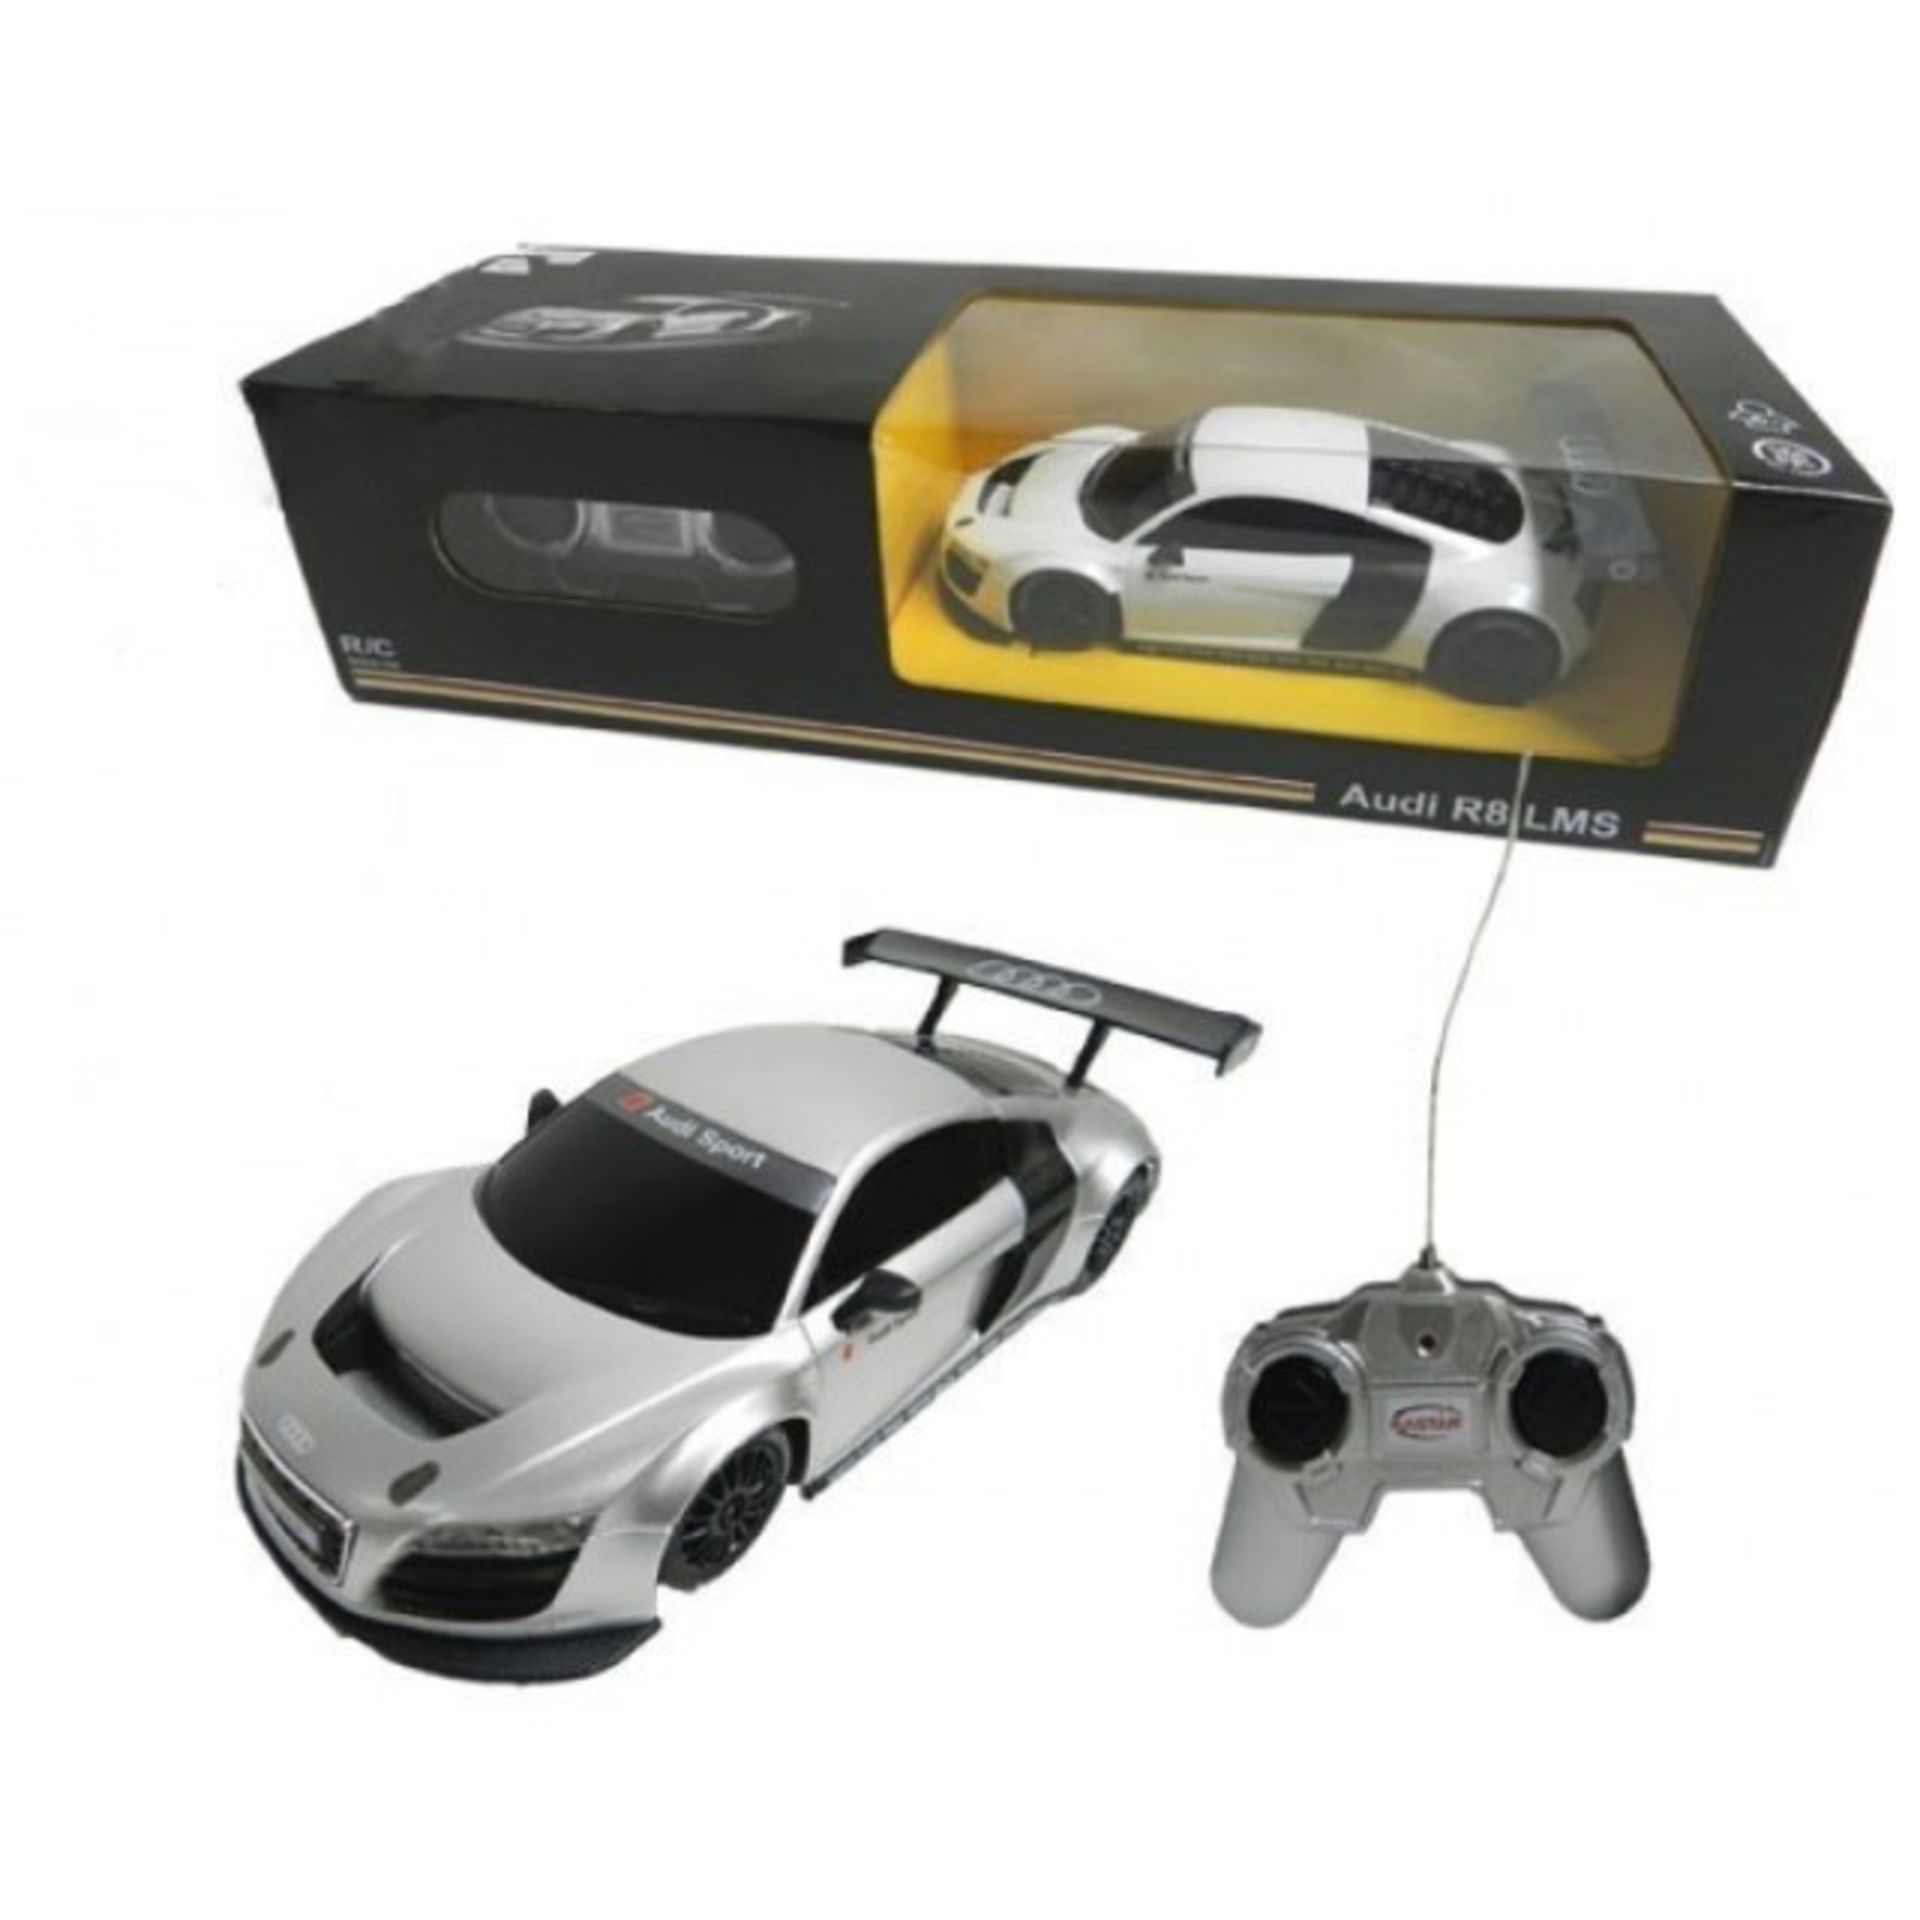 V *TRADE QTY* Brand New 1:24 Scale Radio Control Audi R8 LMS - Officially Licensed Product -